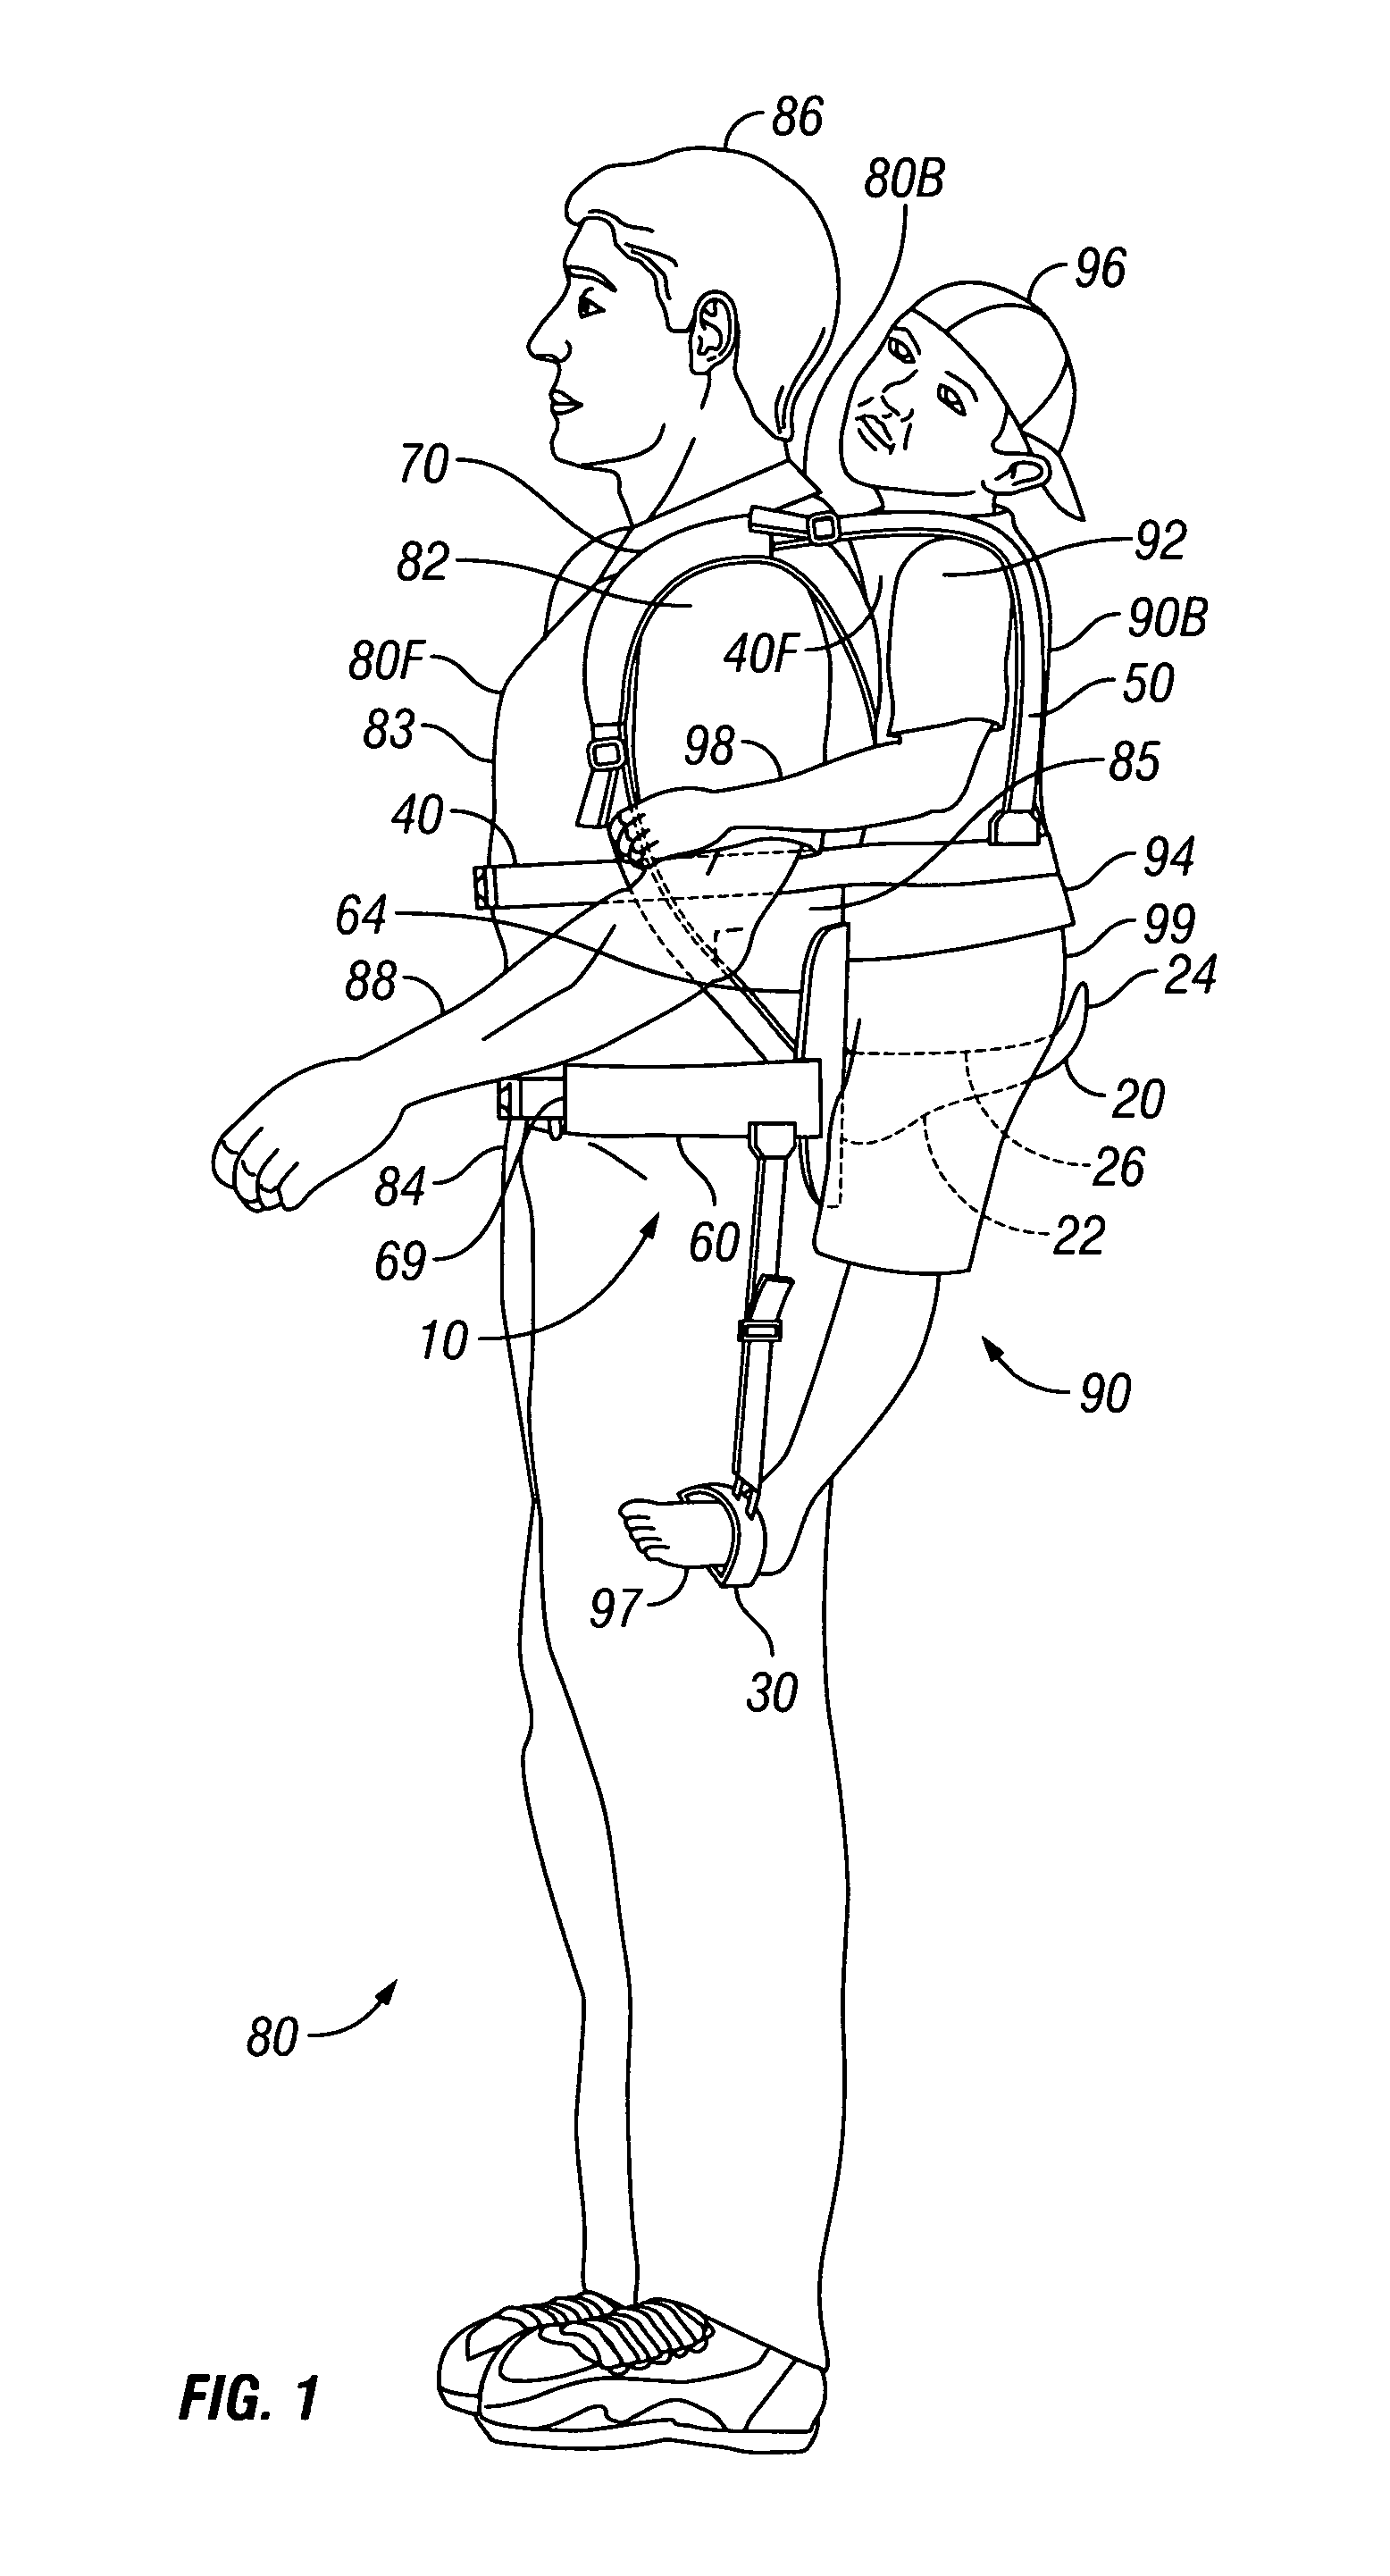 Device for carrying toddlers and small children on an adult wearer's back